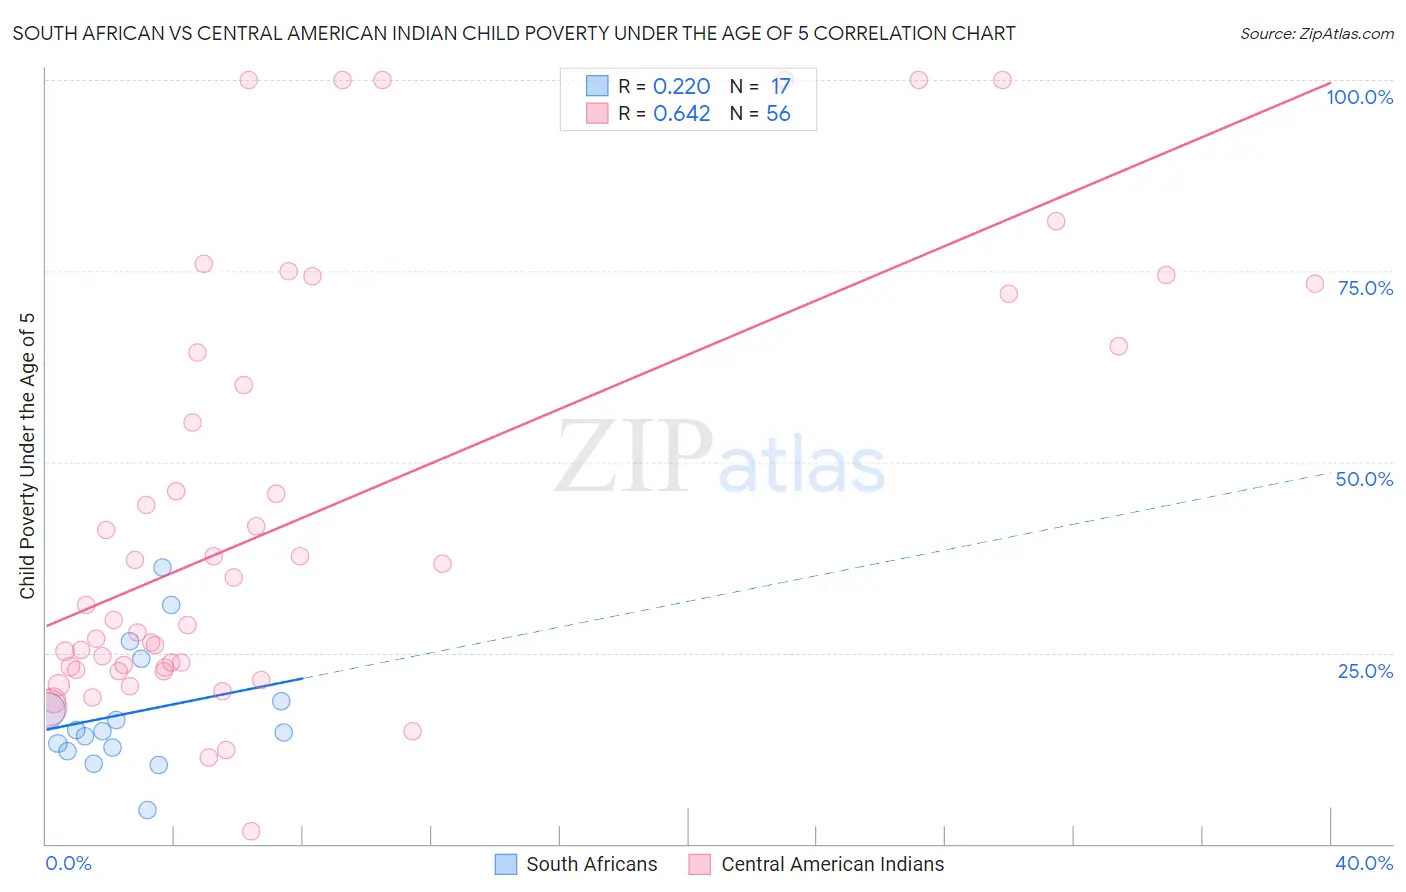 South African vs Central American Indian Child Poverty Under the Age of 5